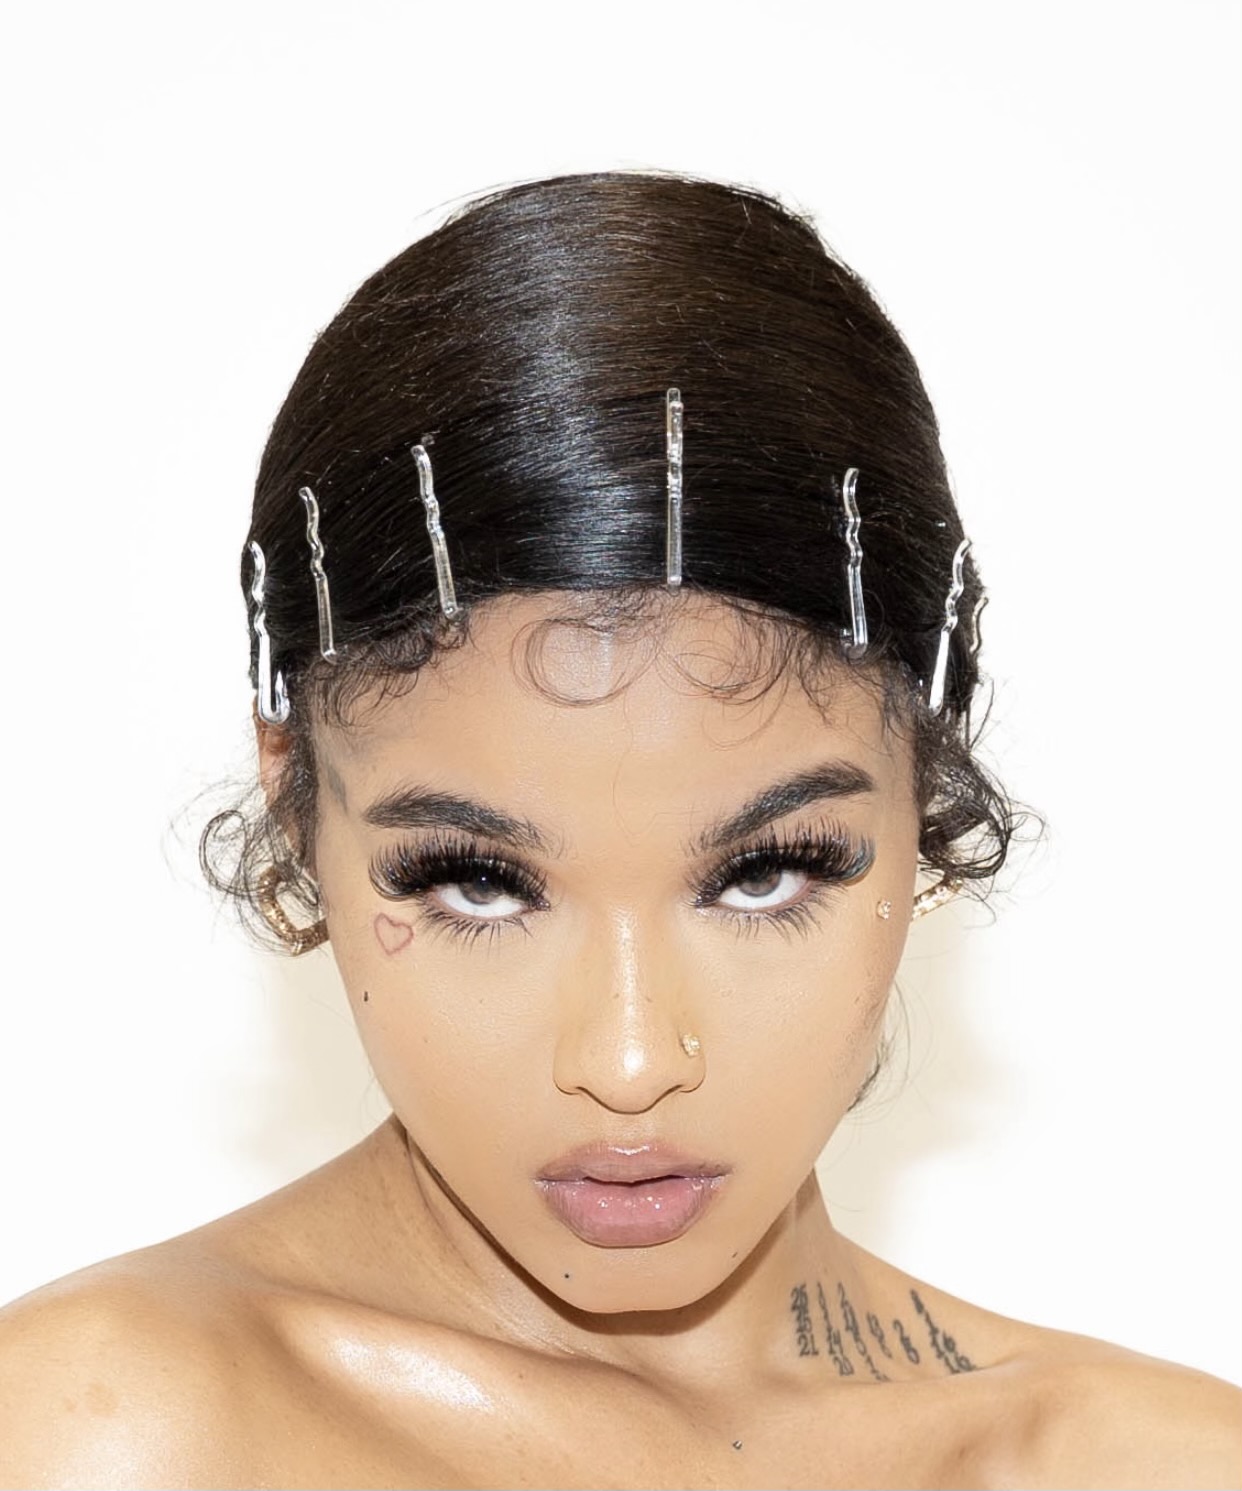 'The Westbrooks' Alum India Love Earns $1 Million on OnlyFans 24 Hours After Joining